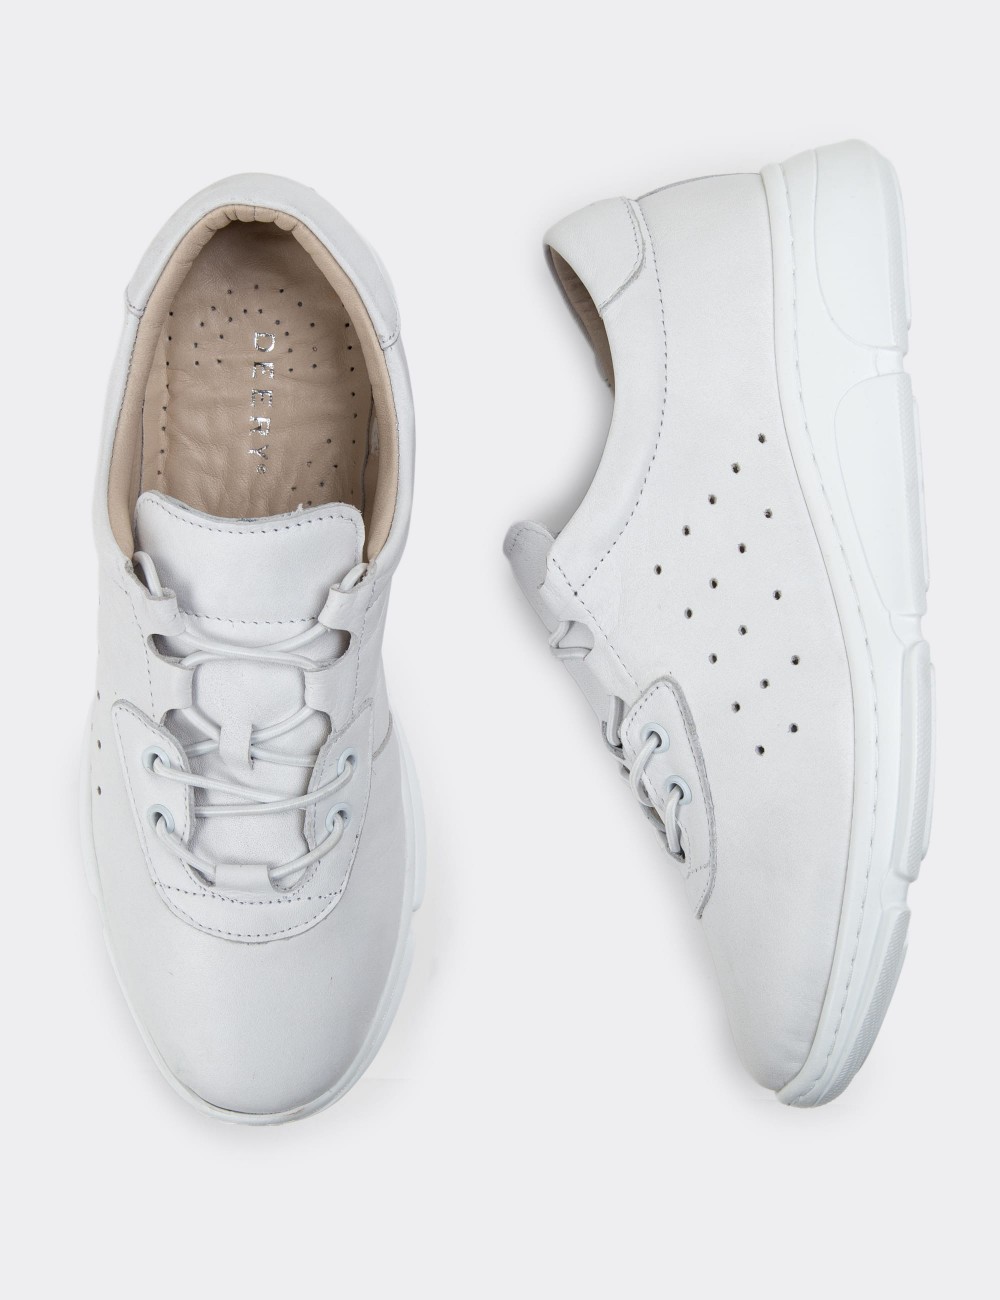 White Leather Sneakers - SE405ZBYZP01